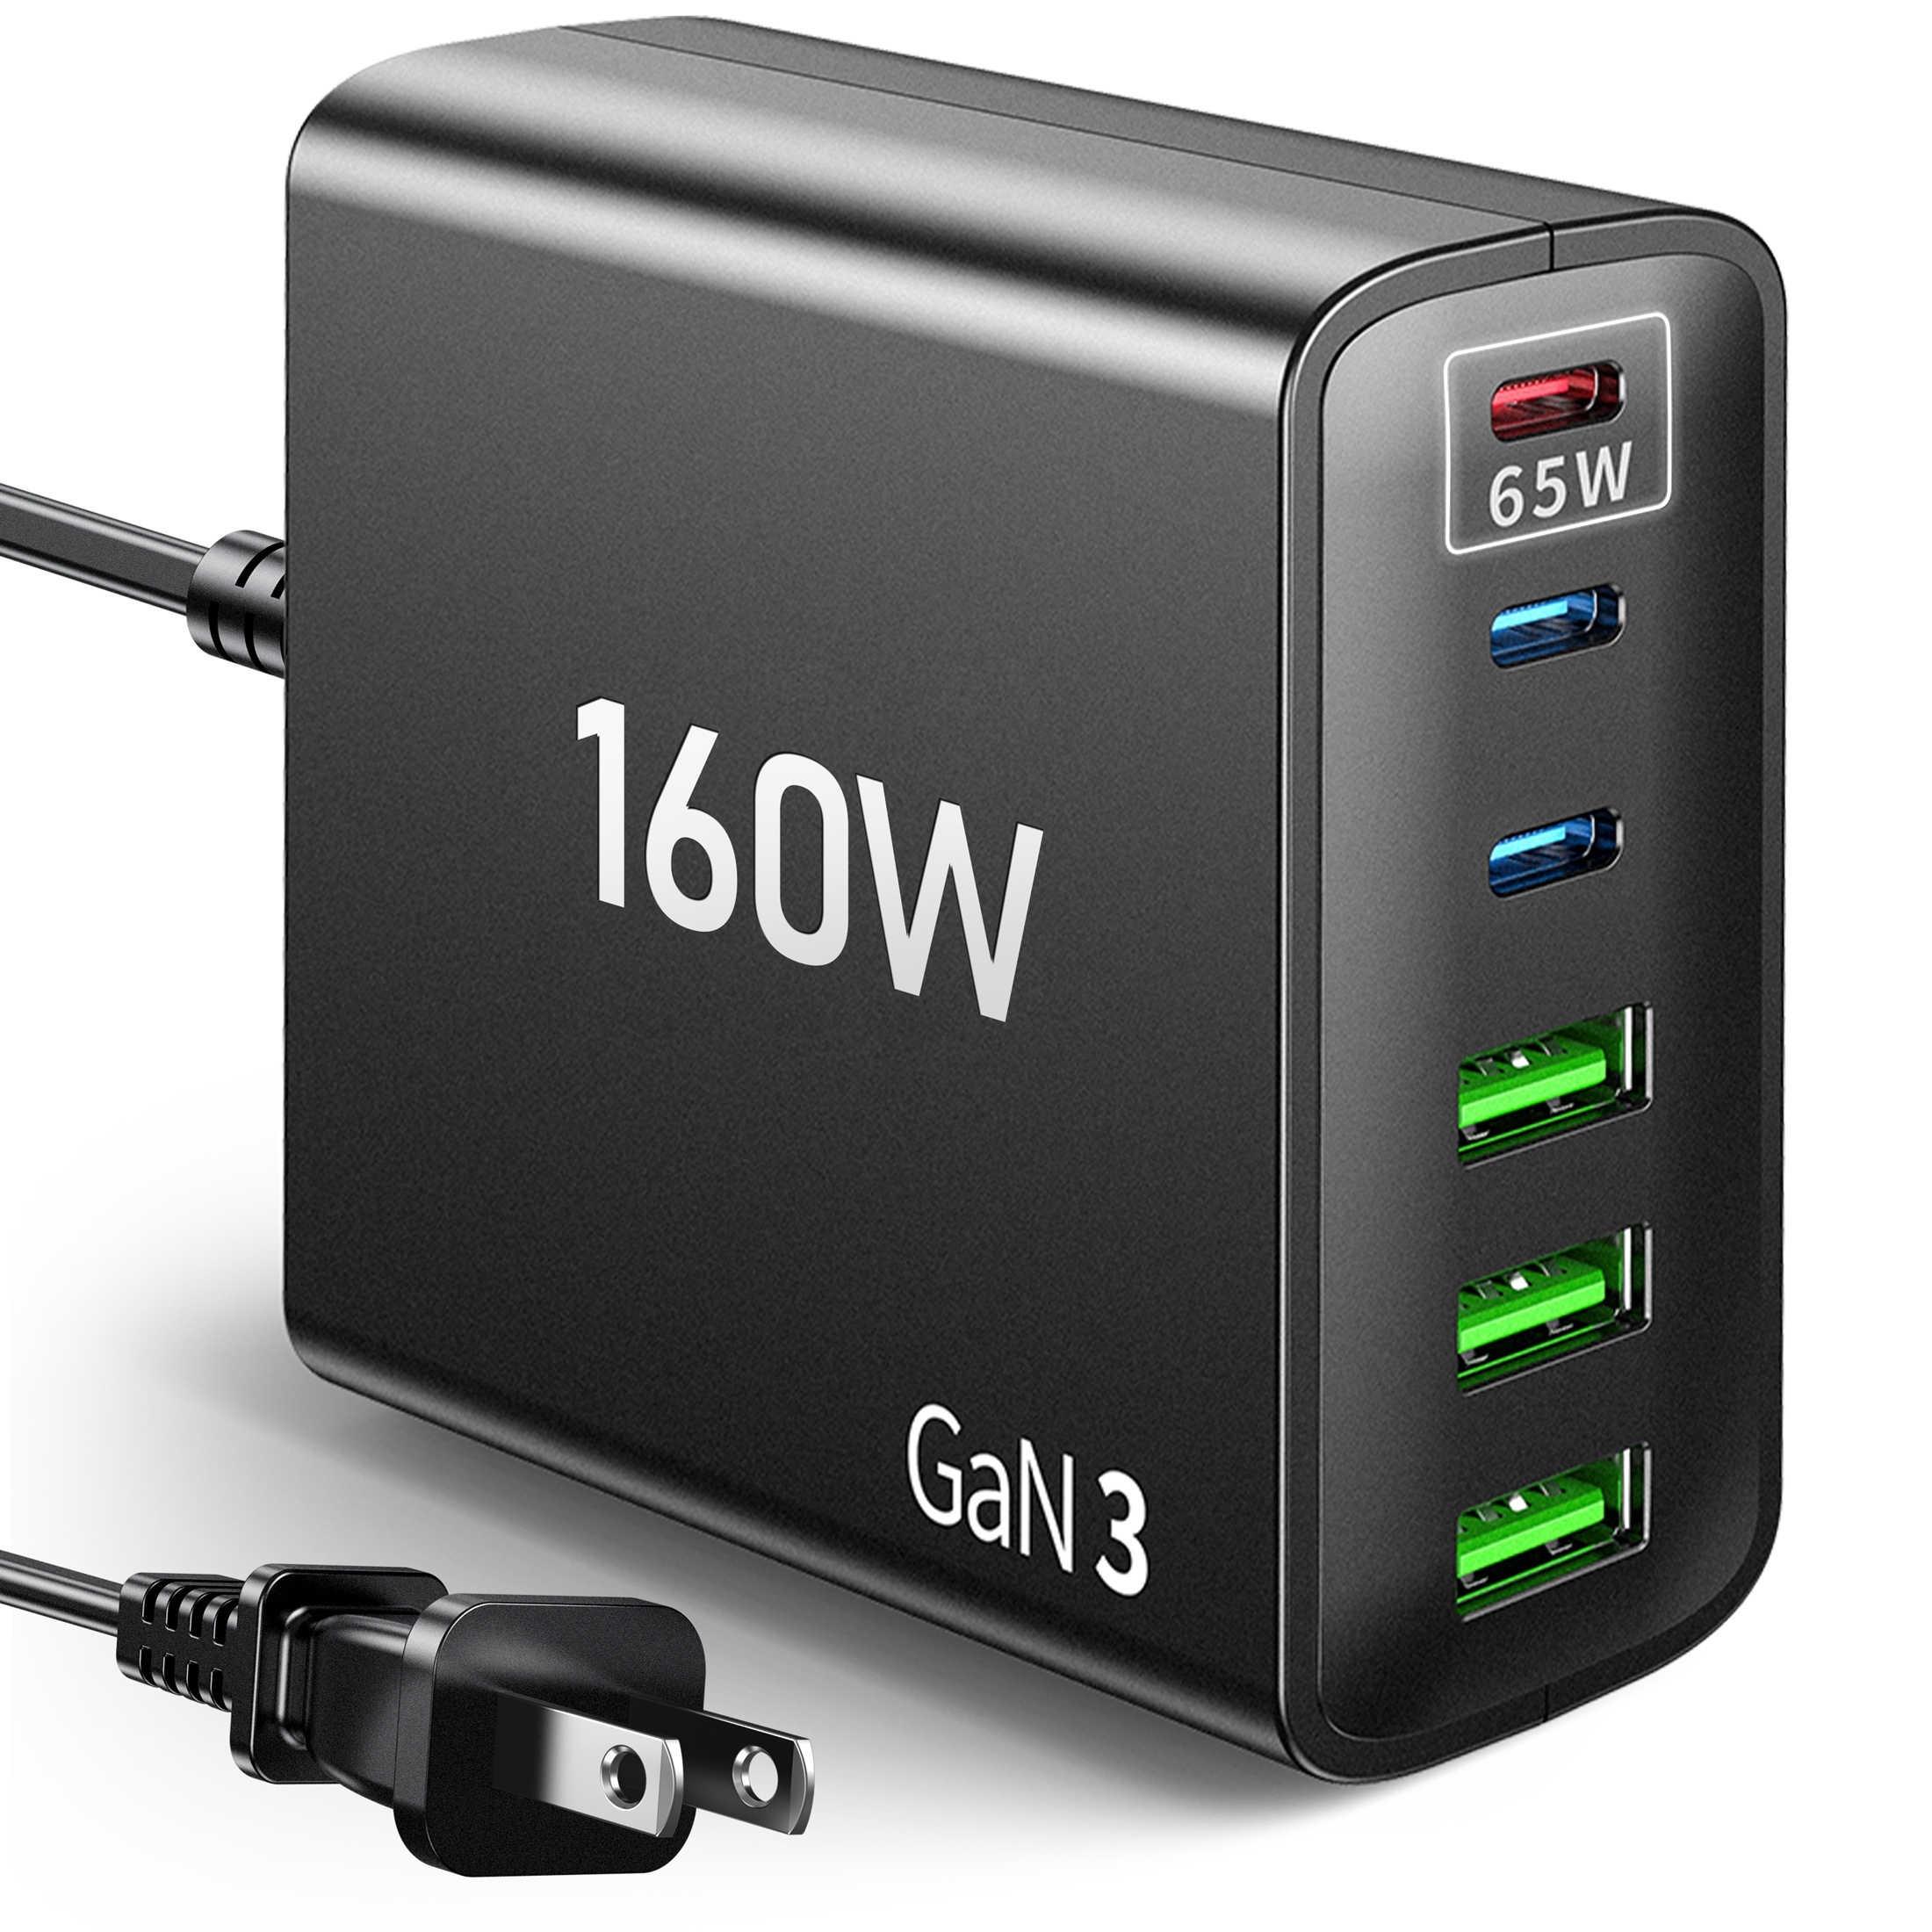 

Usb C Fast Charger Block: 160w Gan Charger 6 Port Pd Charging Station Brick For All Ipad Iphone Series - Wall Charger Power Adapter For Samsung Galaxy Note - Laptop Charger For Macbook Air Pro